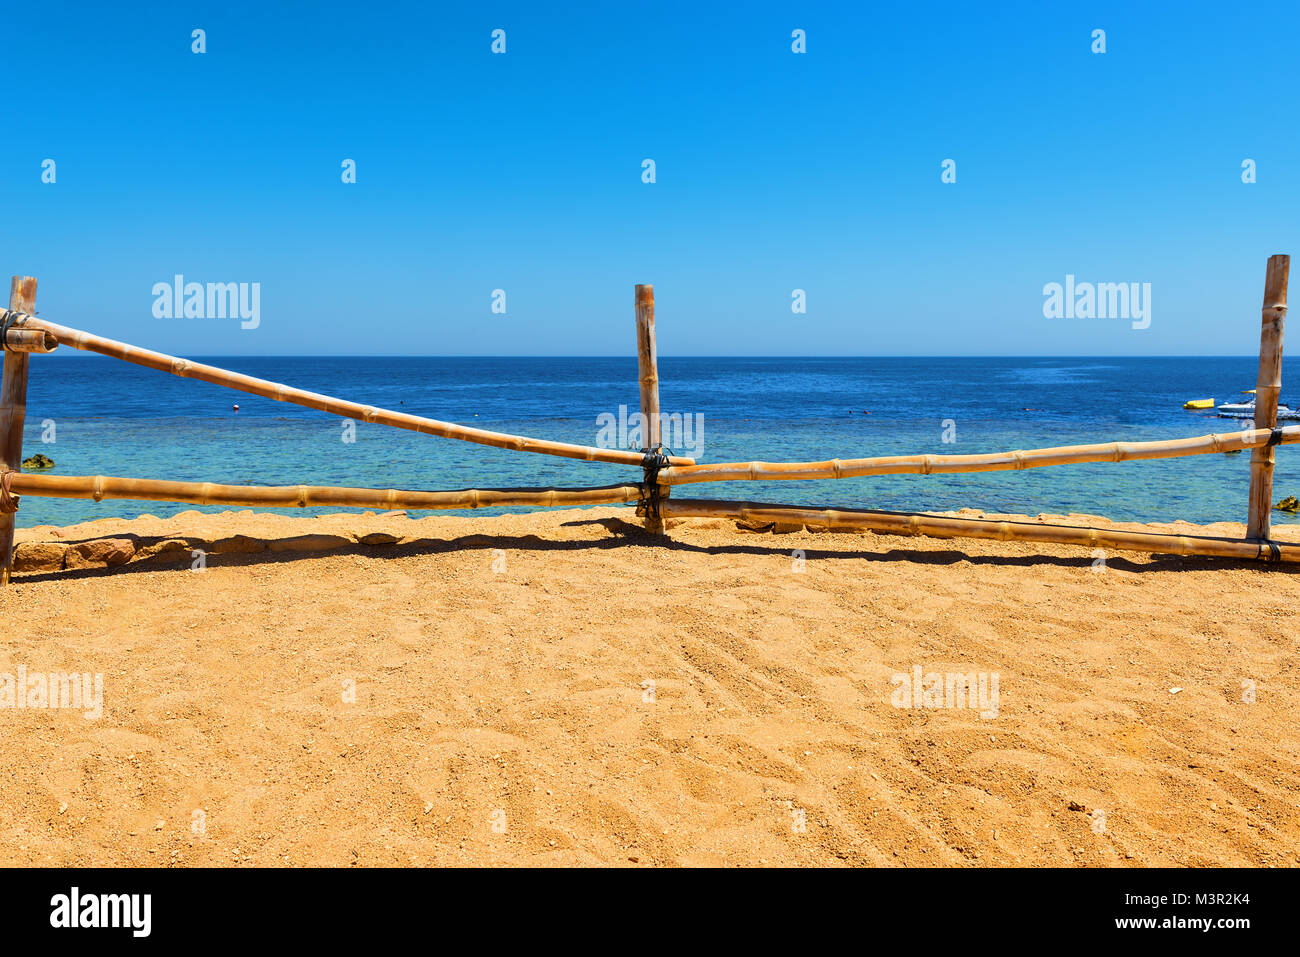 Sandy beach in egyptian hotel at day Stock Photo